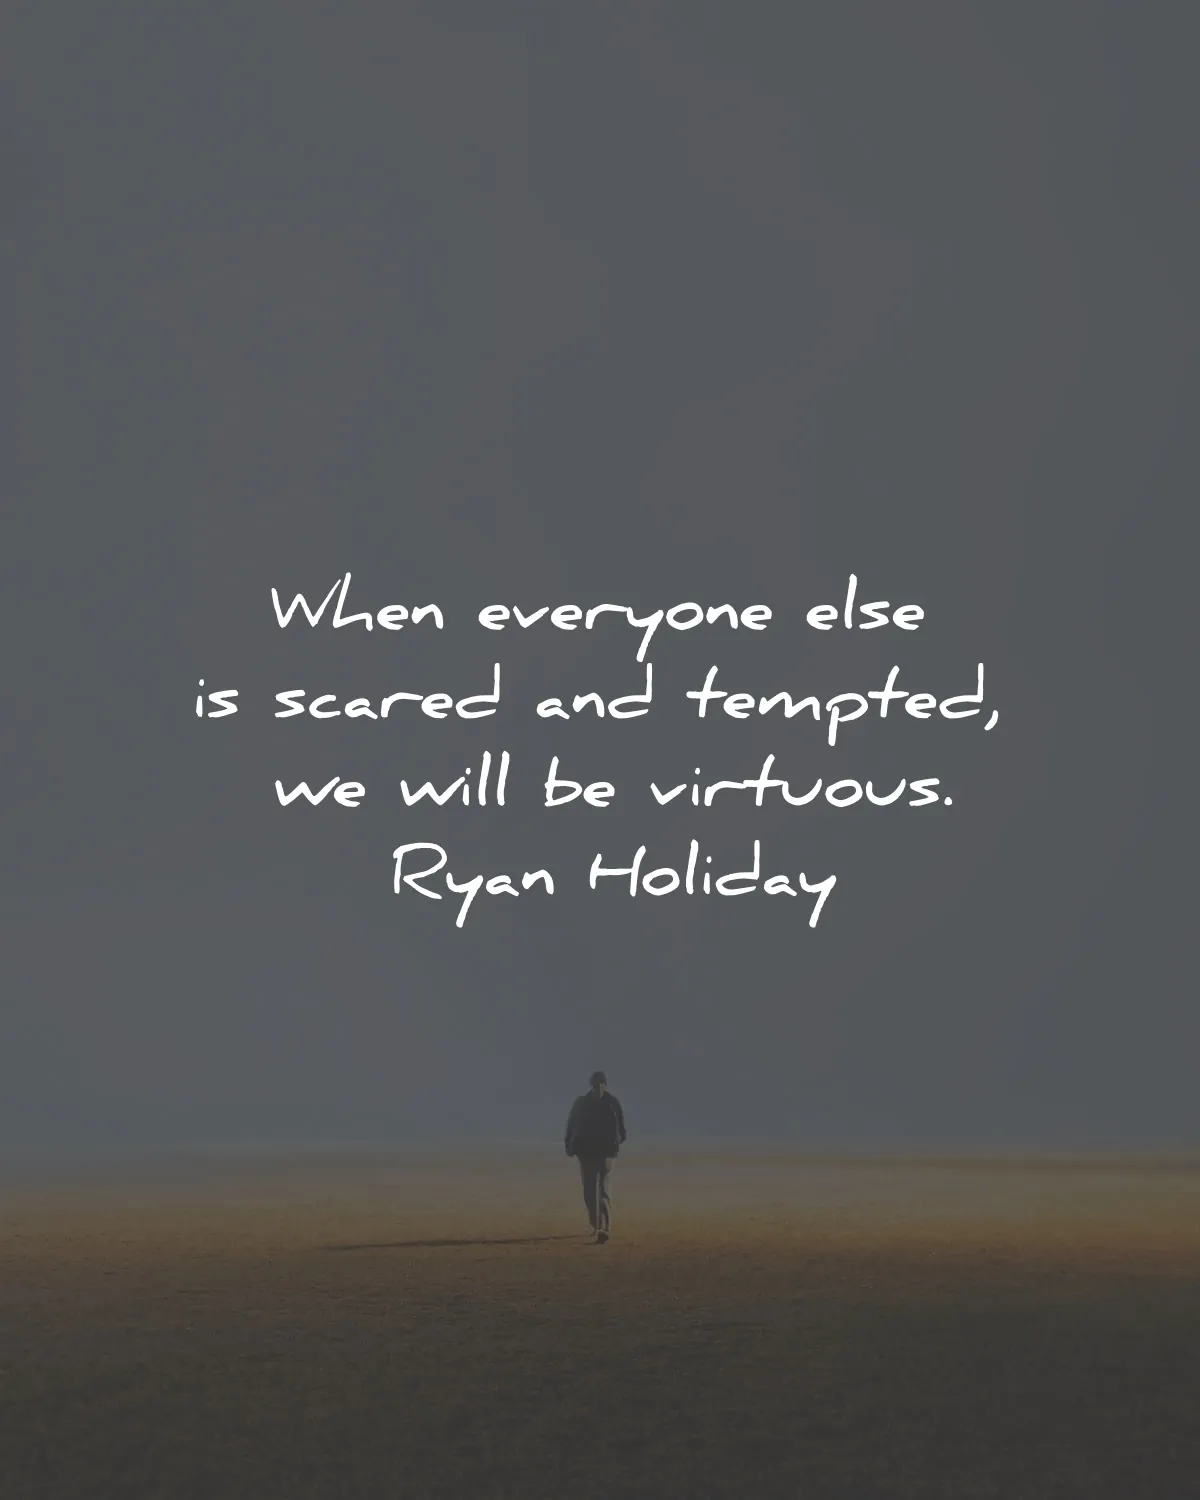 stillness is the key quotes summary ryan holiday everyone scared virtuous wisdom